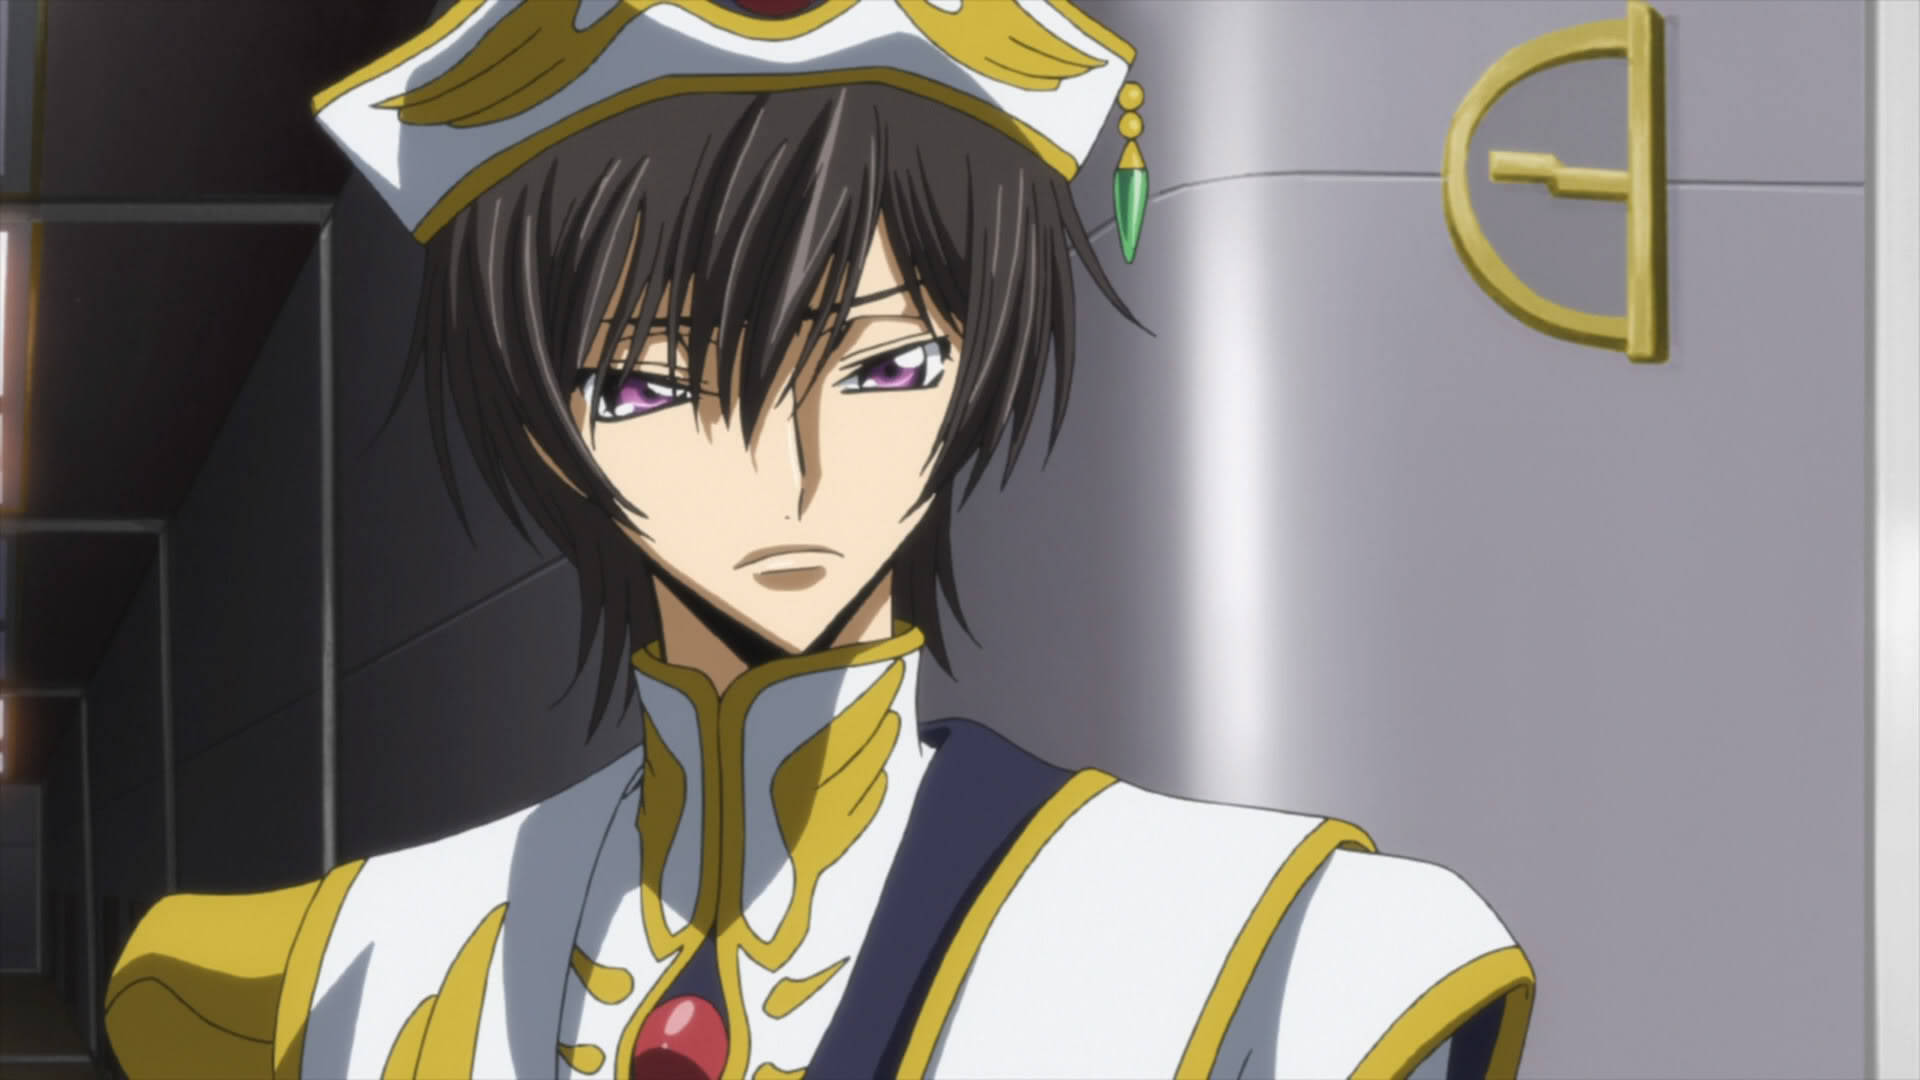 Charming Lelouch Lamperouge